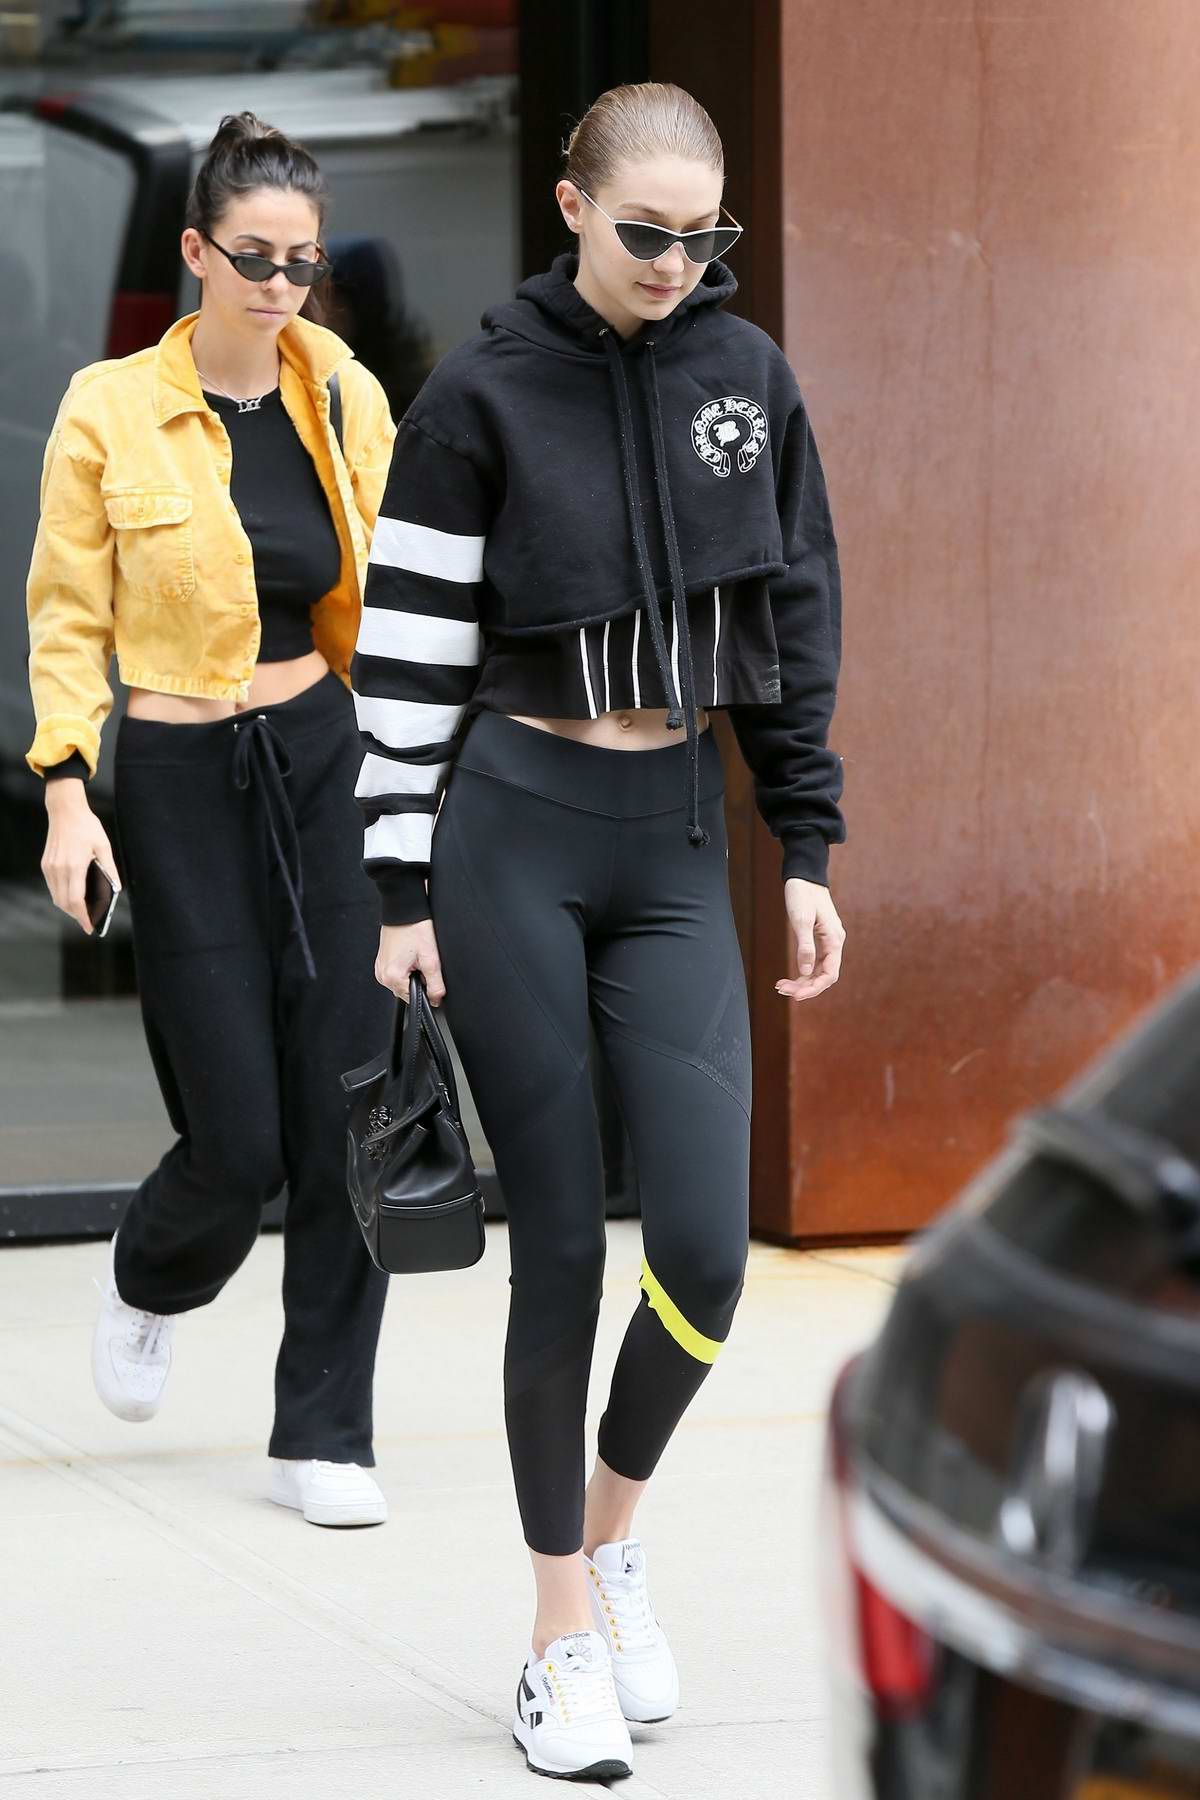 gigi hadid dons an all black outfit with a versace bag as she heads out in  new york city-090318_3